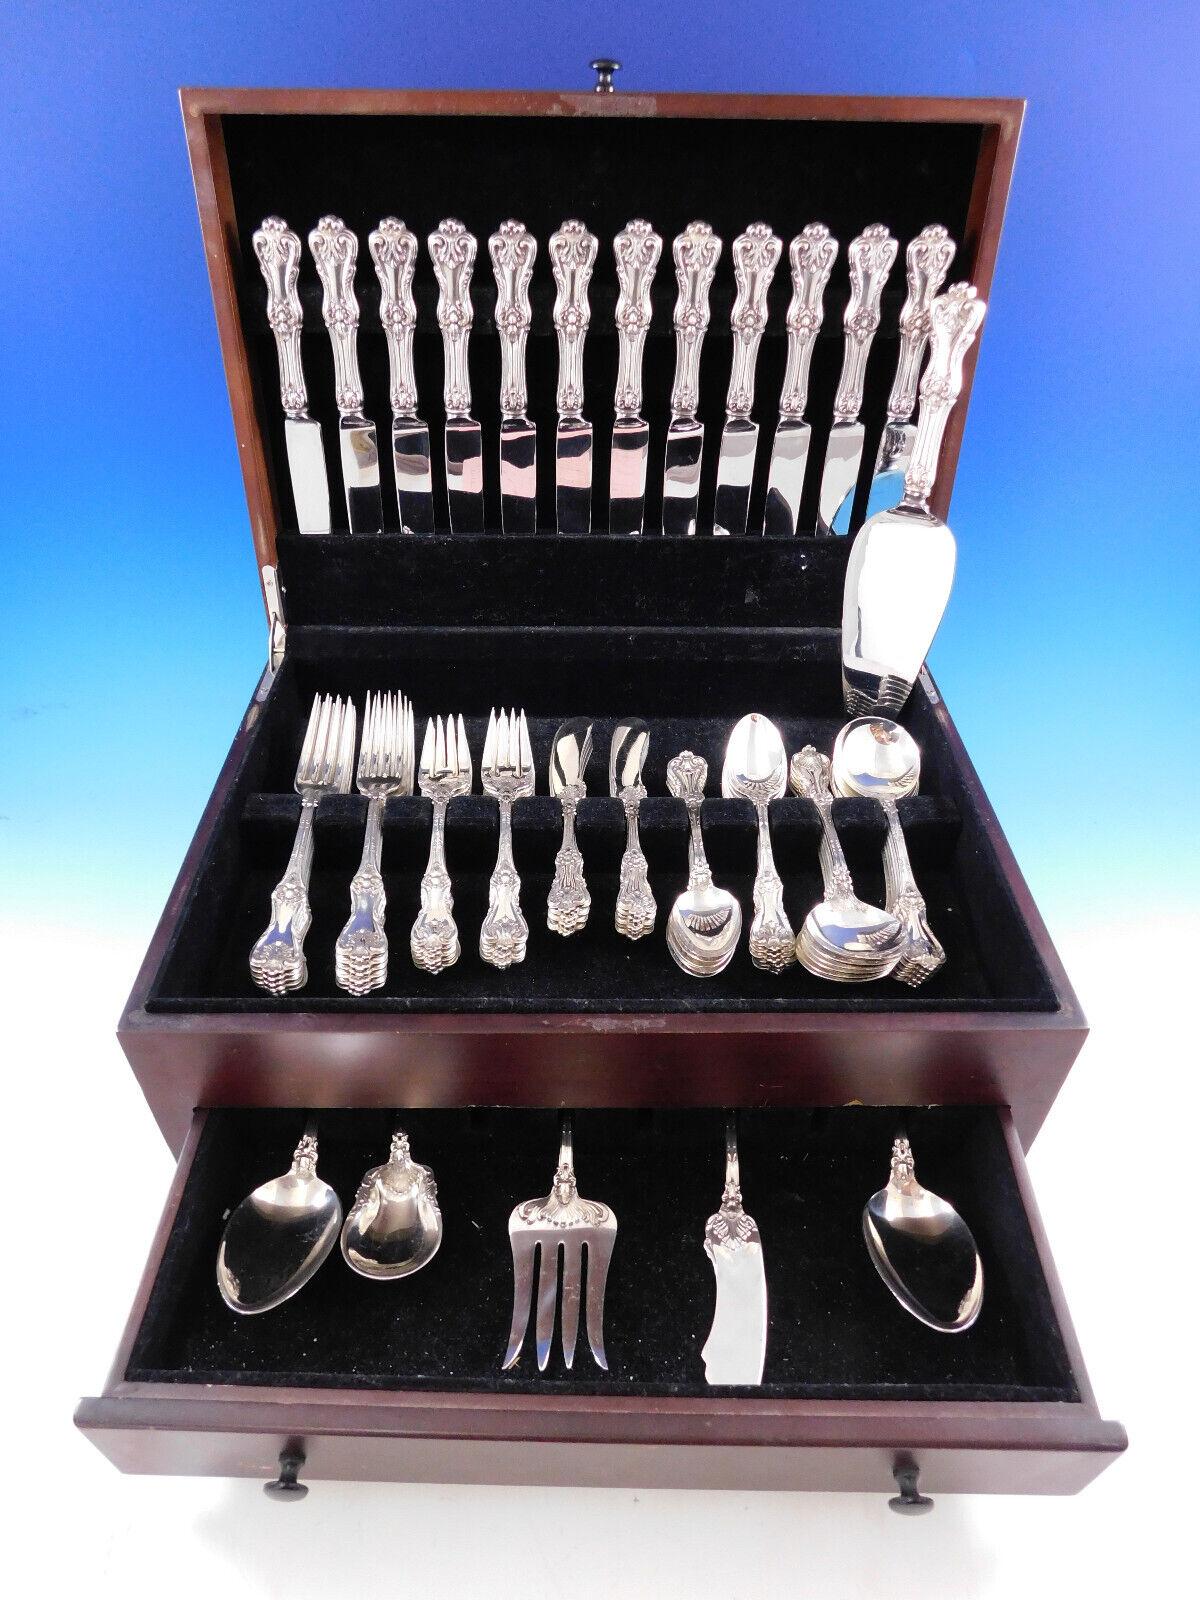 Federal Cotillion, a stately flatware design rich with ornamentation graces this uniquely shaped pattern. Federal Cotillion features intricate shell detailing involving both the stem and the handle. An elegant addition to any table.
 
FEDERAL